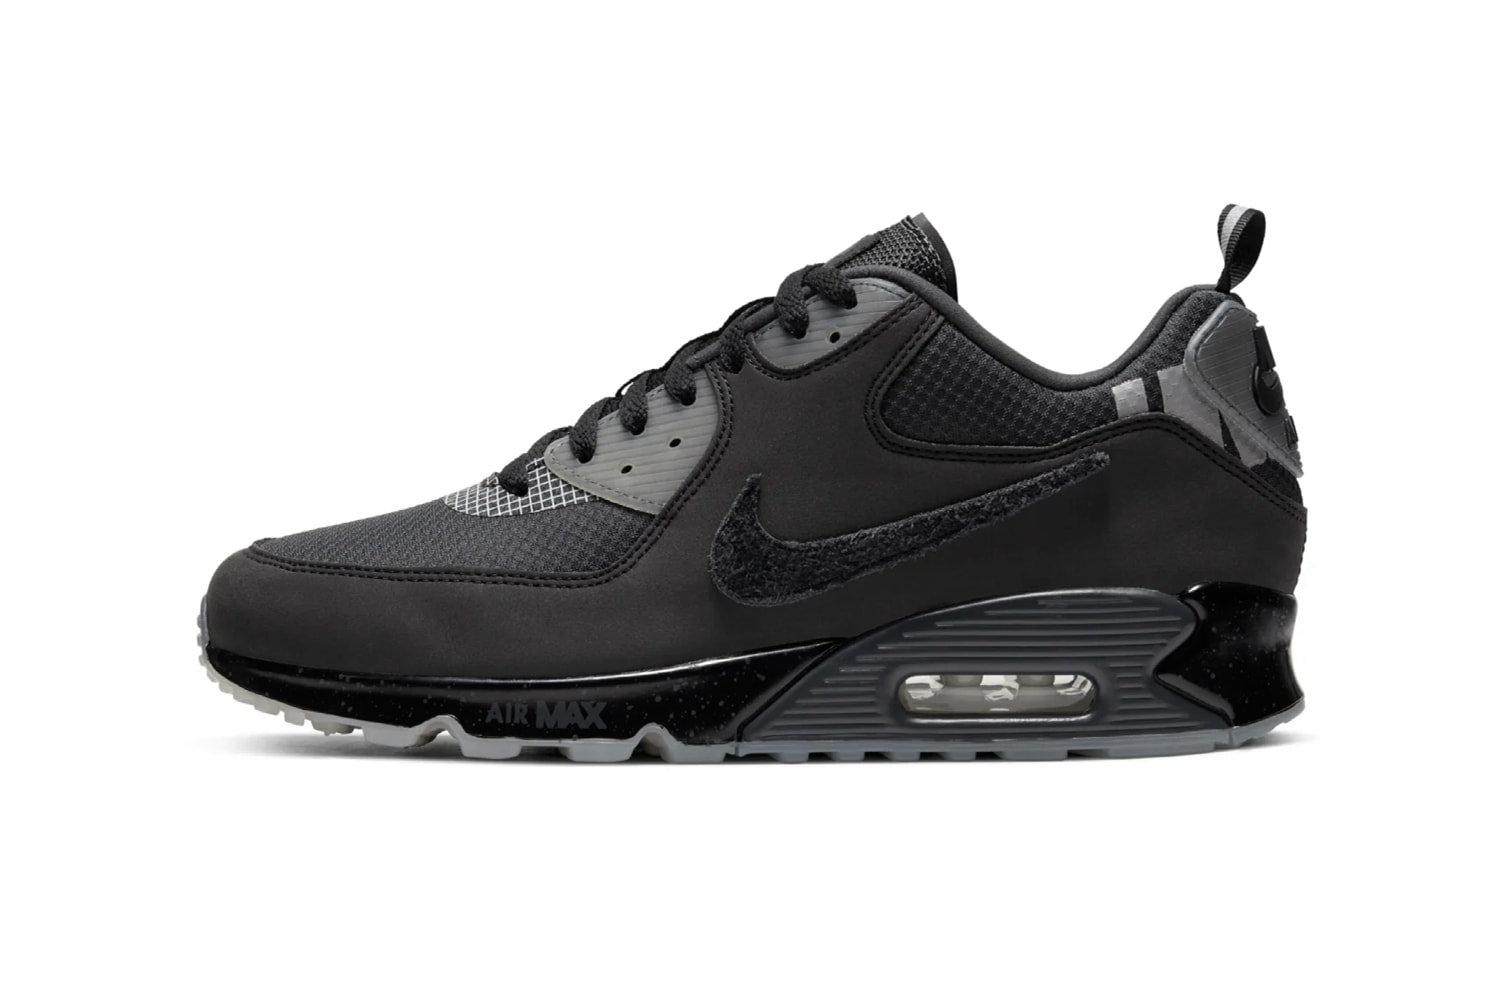 undefeated nike air max 90 Black CQ2289-002 release info Color: Black/Black-Anthracite-Rush Pink AM90 bubble unit drop date price